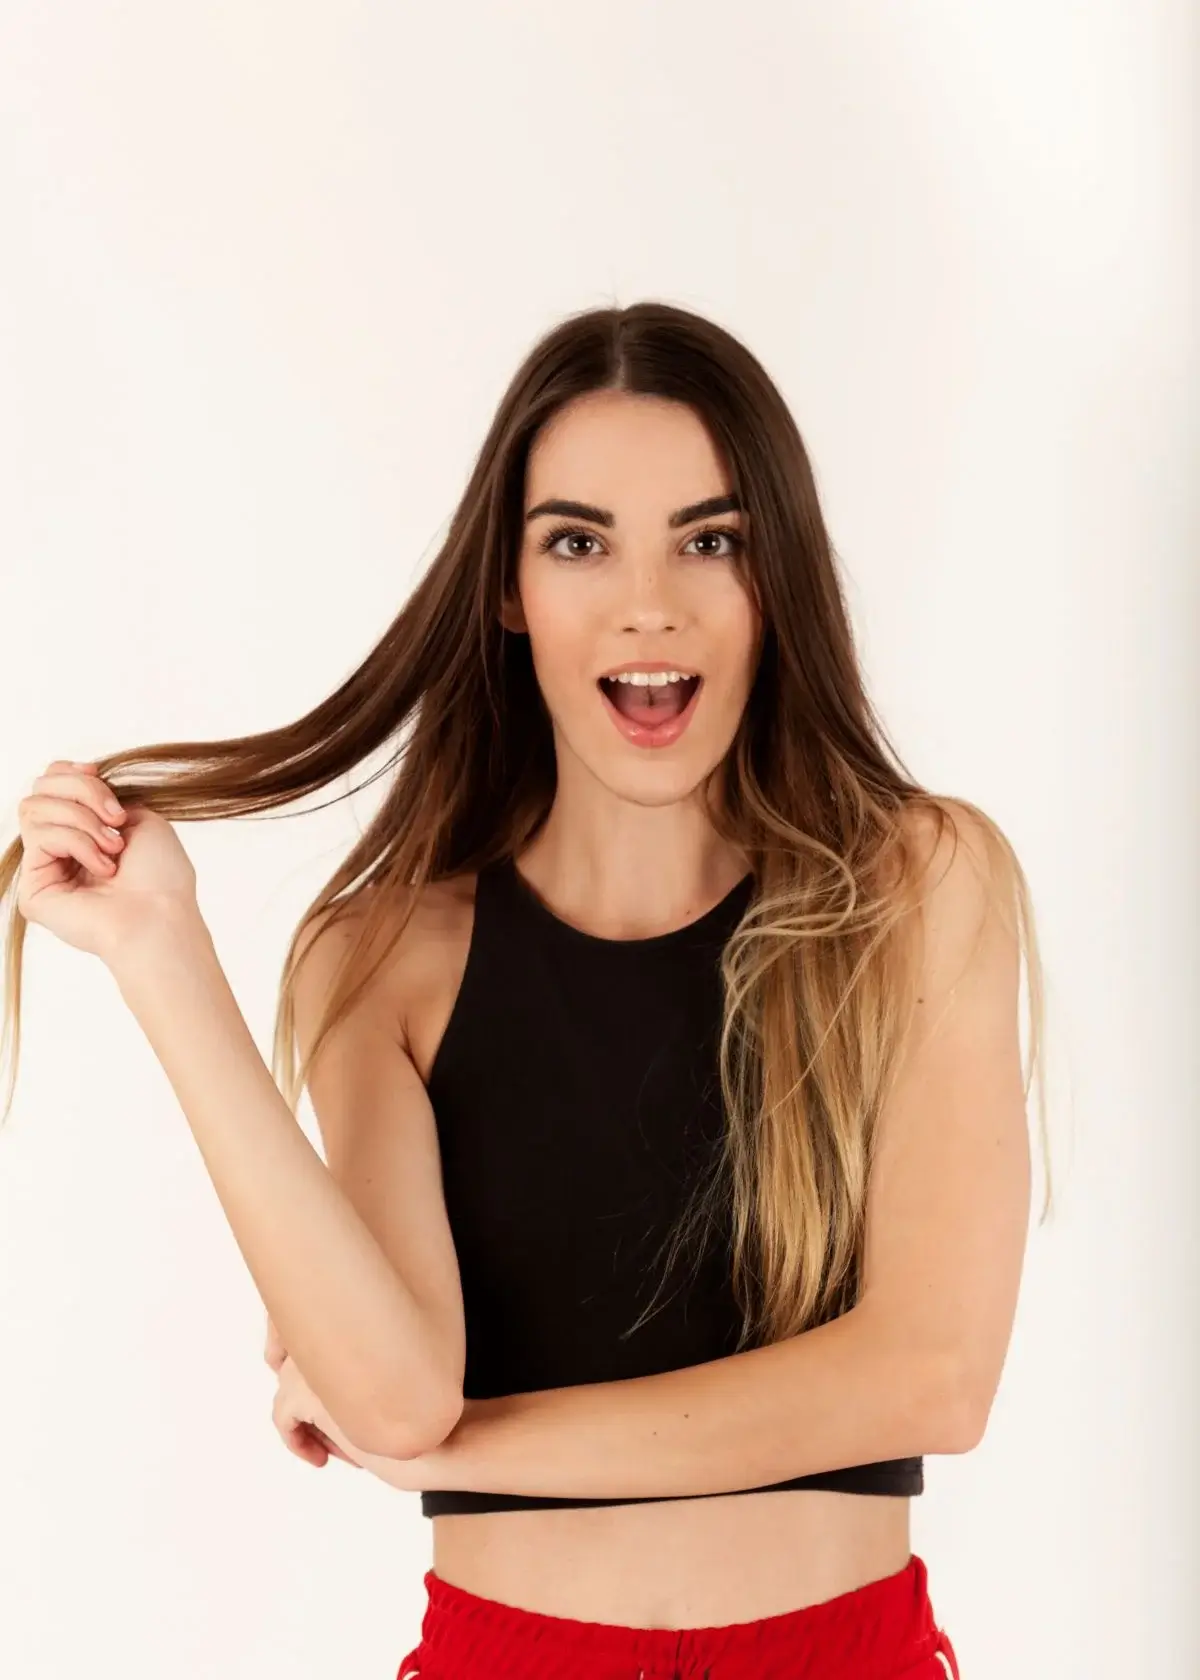 How to choose the right extensions for thin hair?